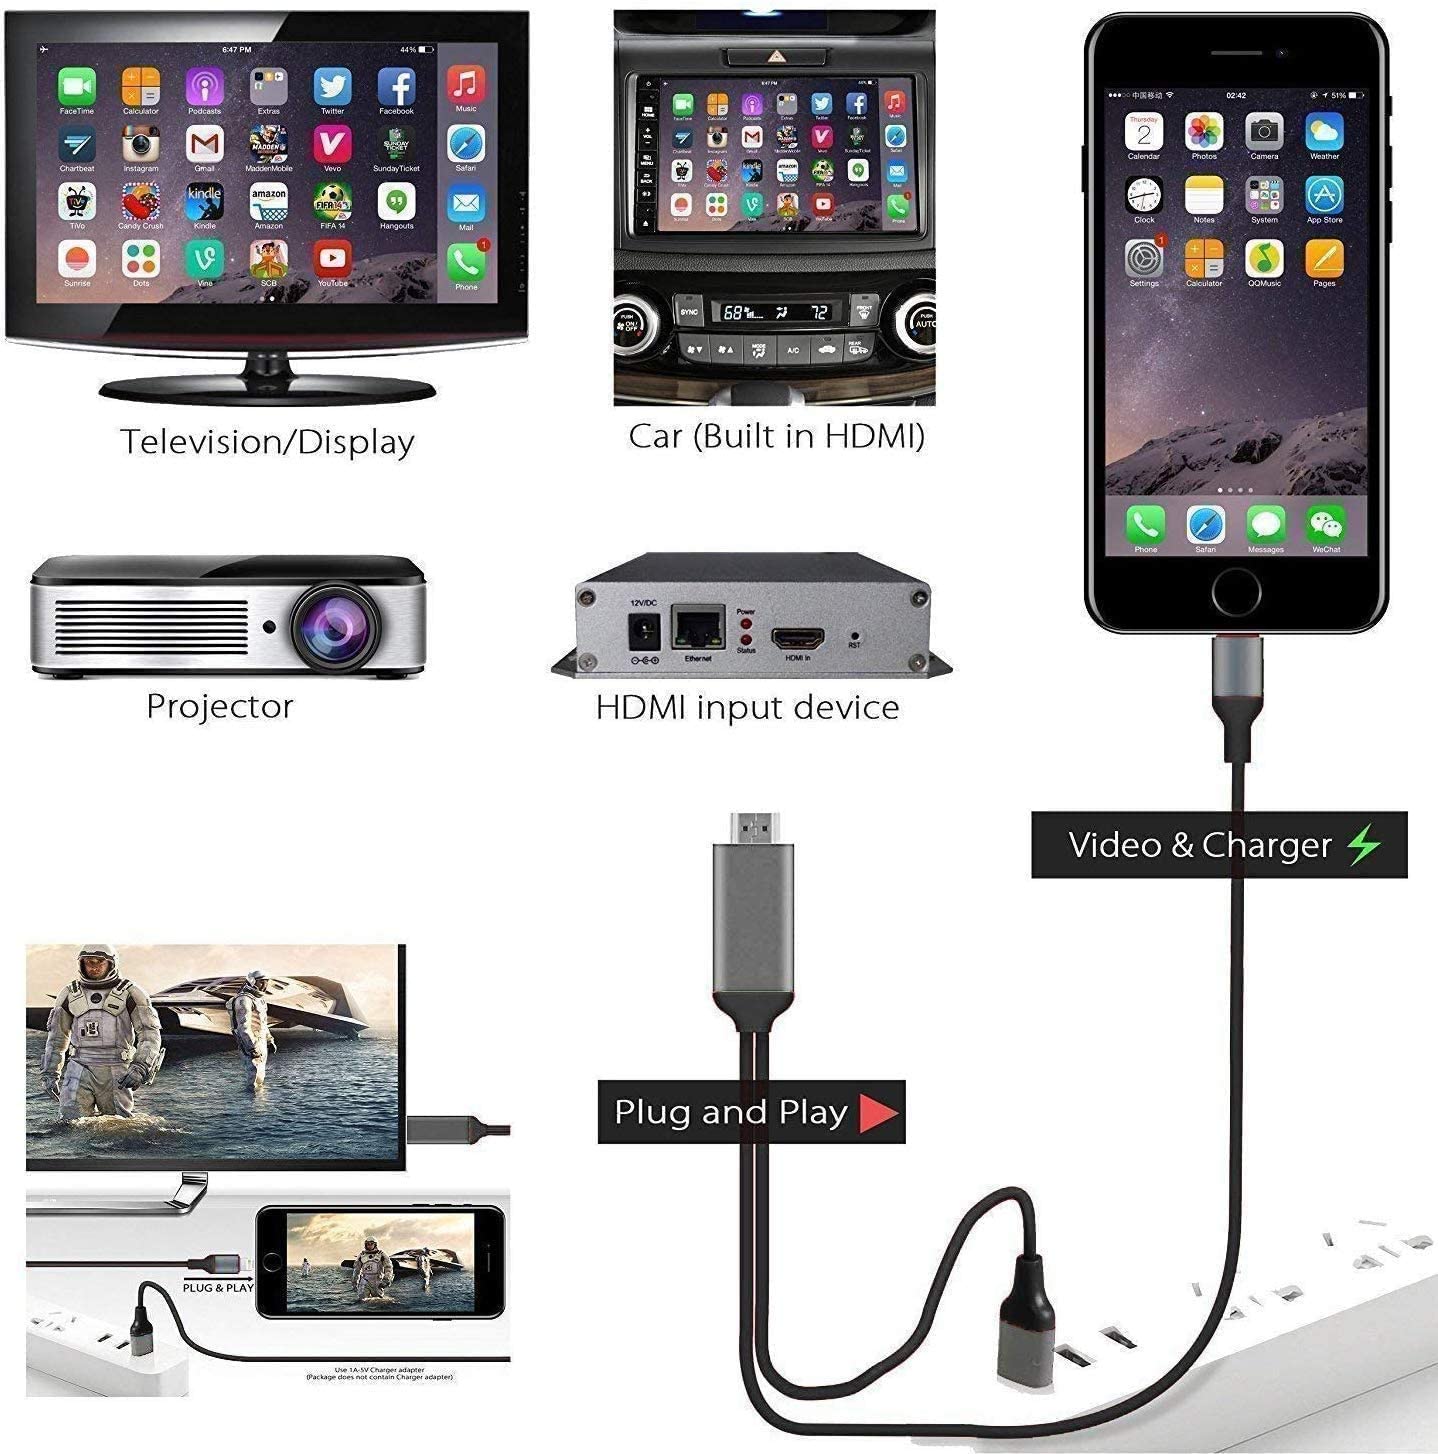 LHC-6: 6ft Lightning to HDMI Video Adapter Cable for iPhone iPad to HDTV Converter